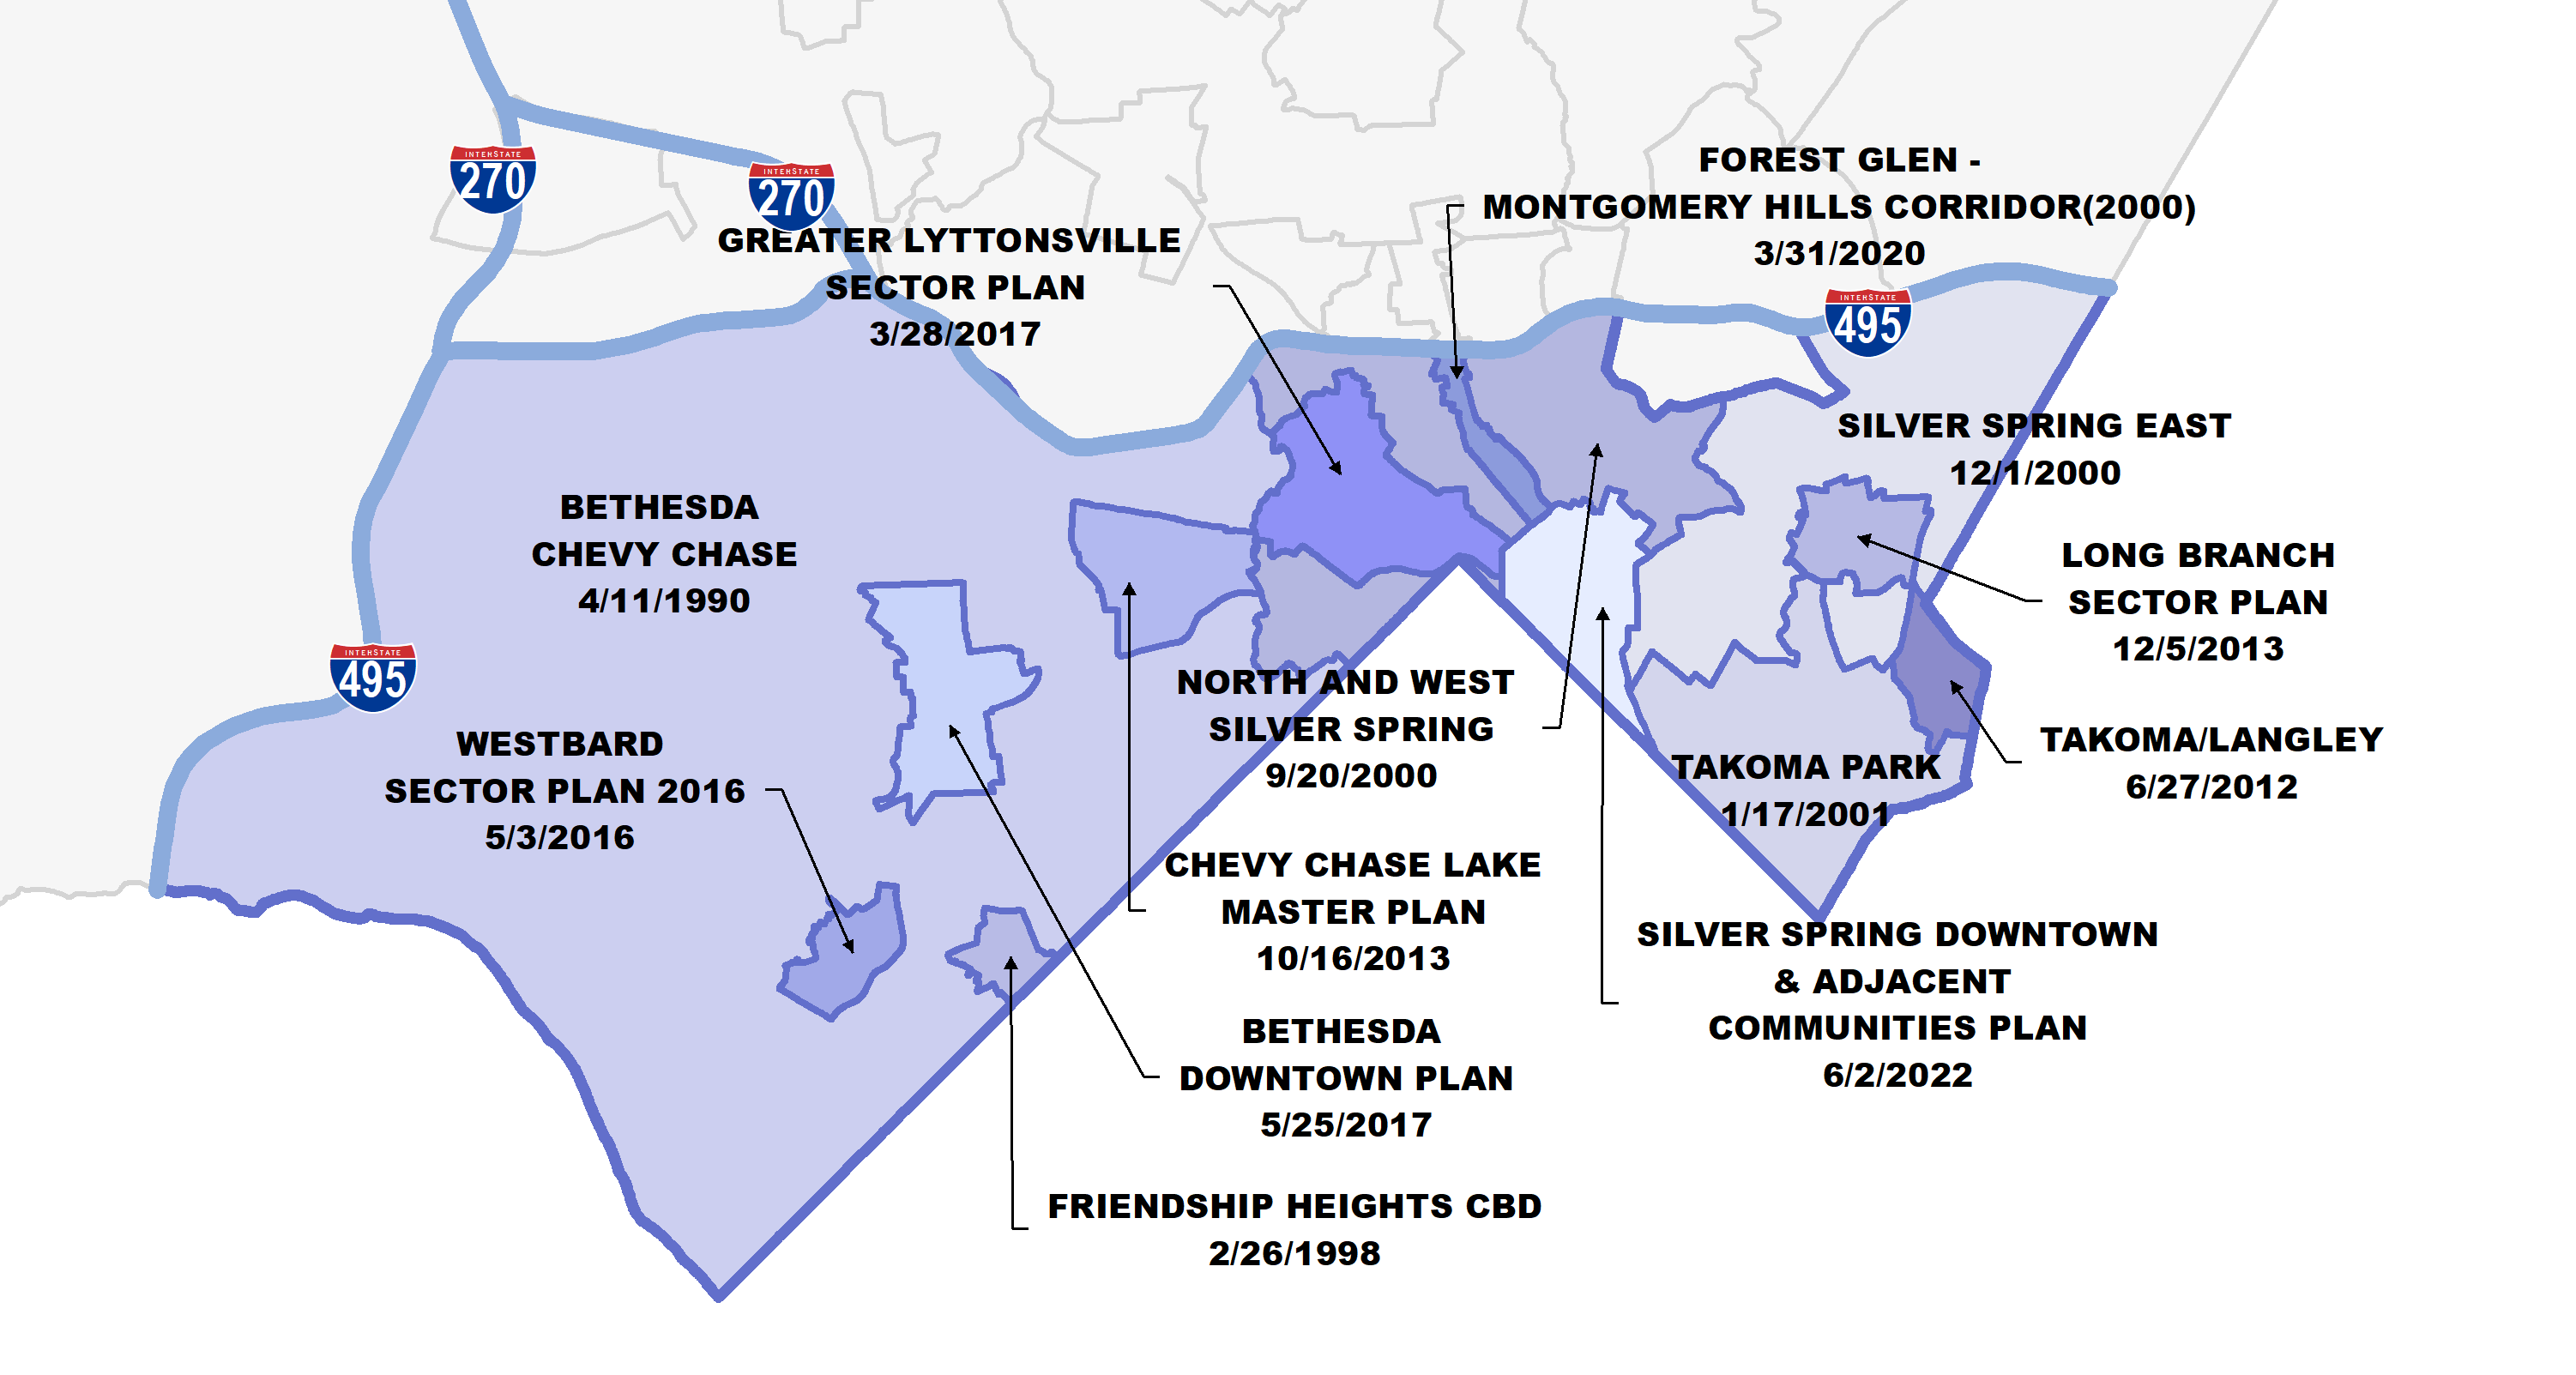 Every New MCPS School That Has Opened Since 1985 - The MoCo Show